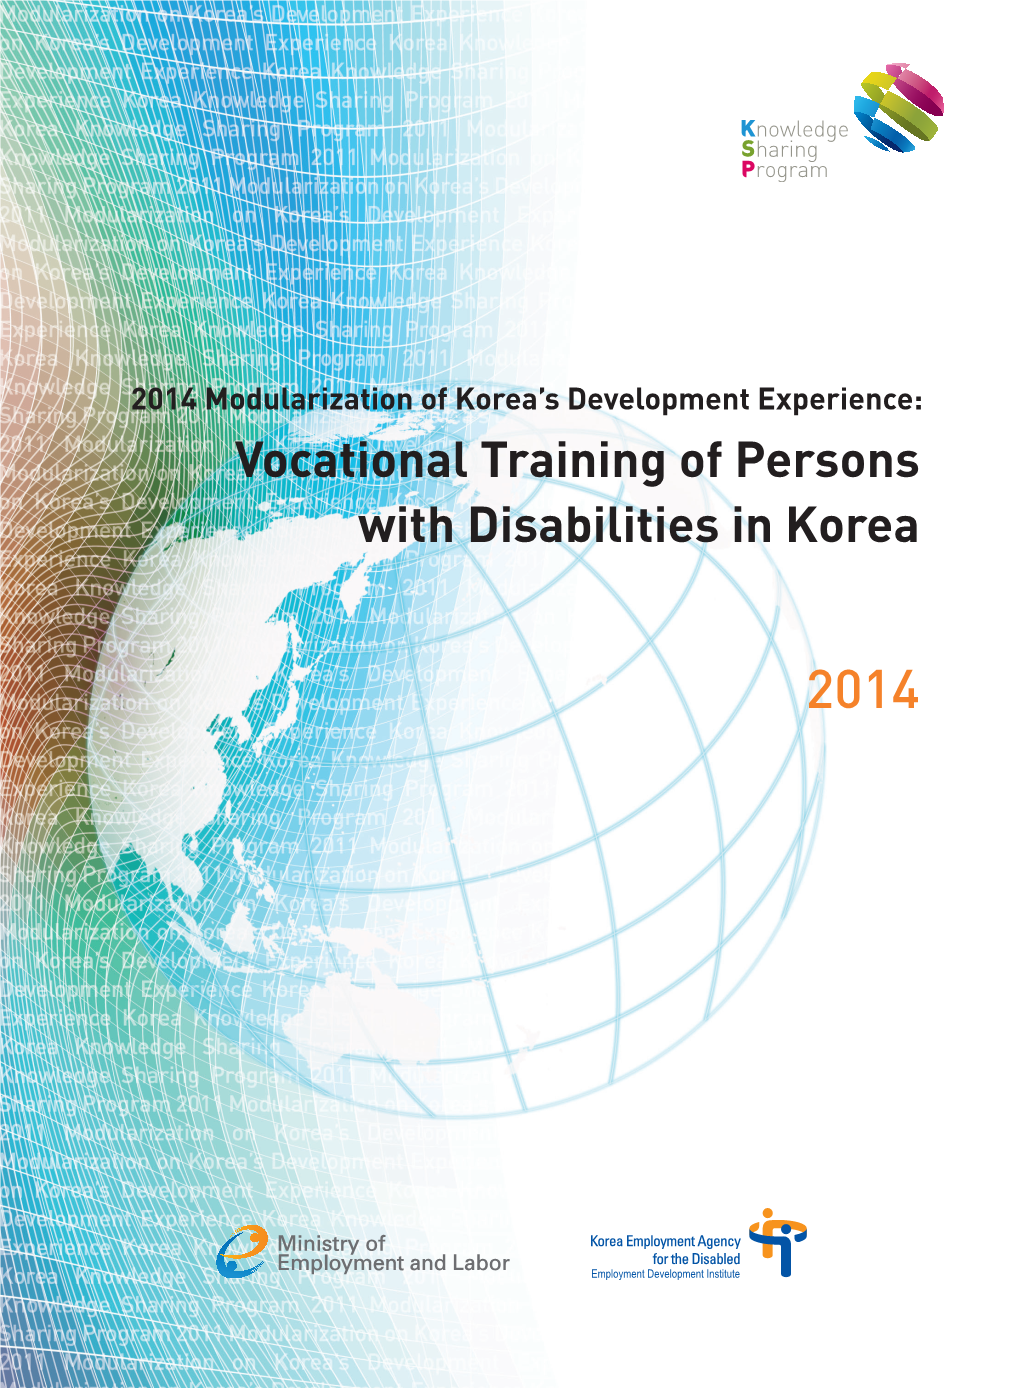 Vocational Training of Persons with Disabilities in Korea